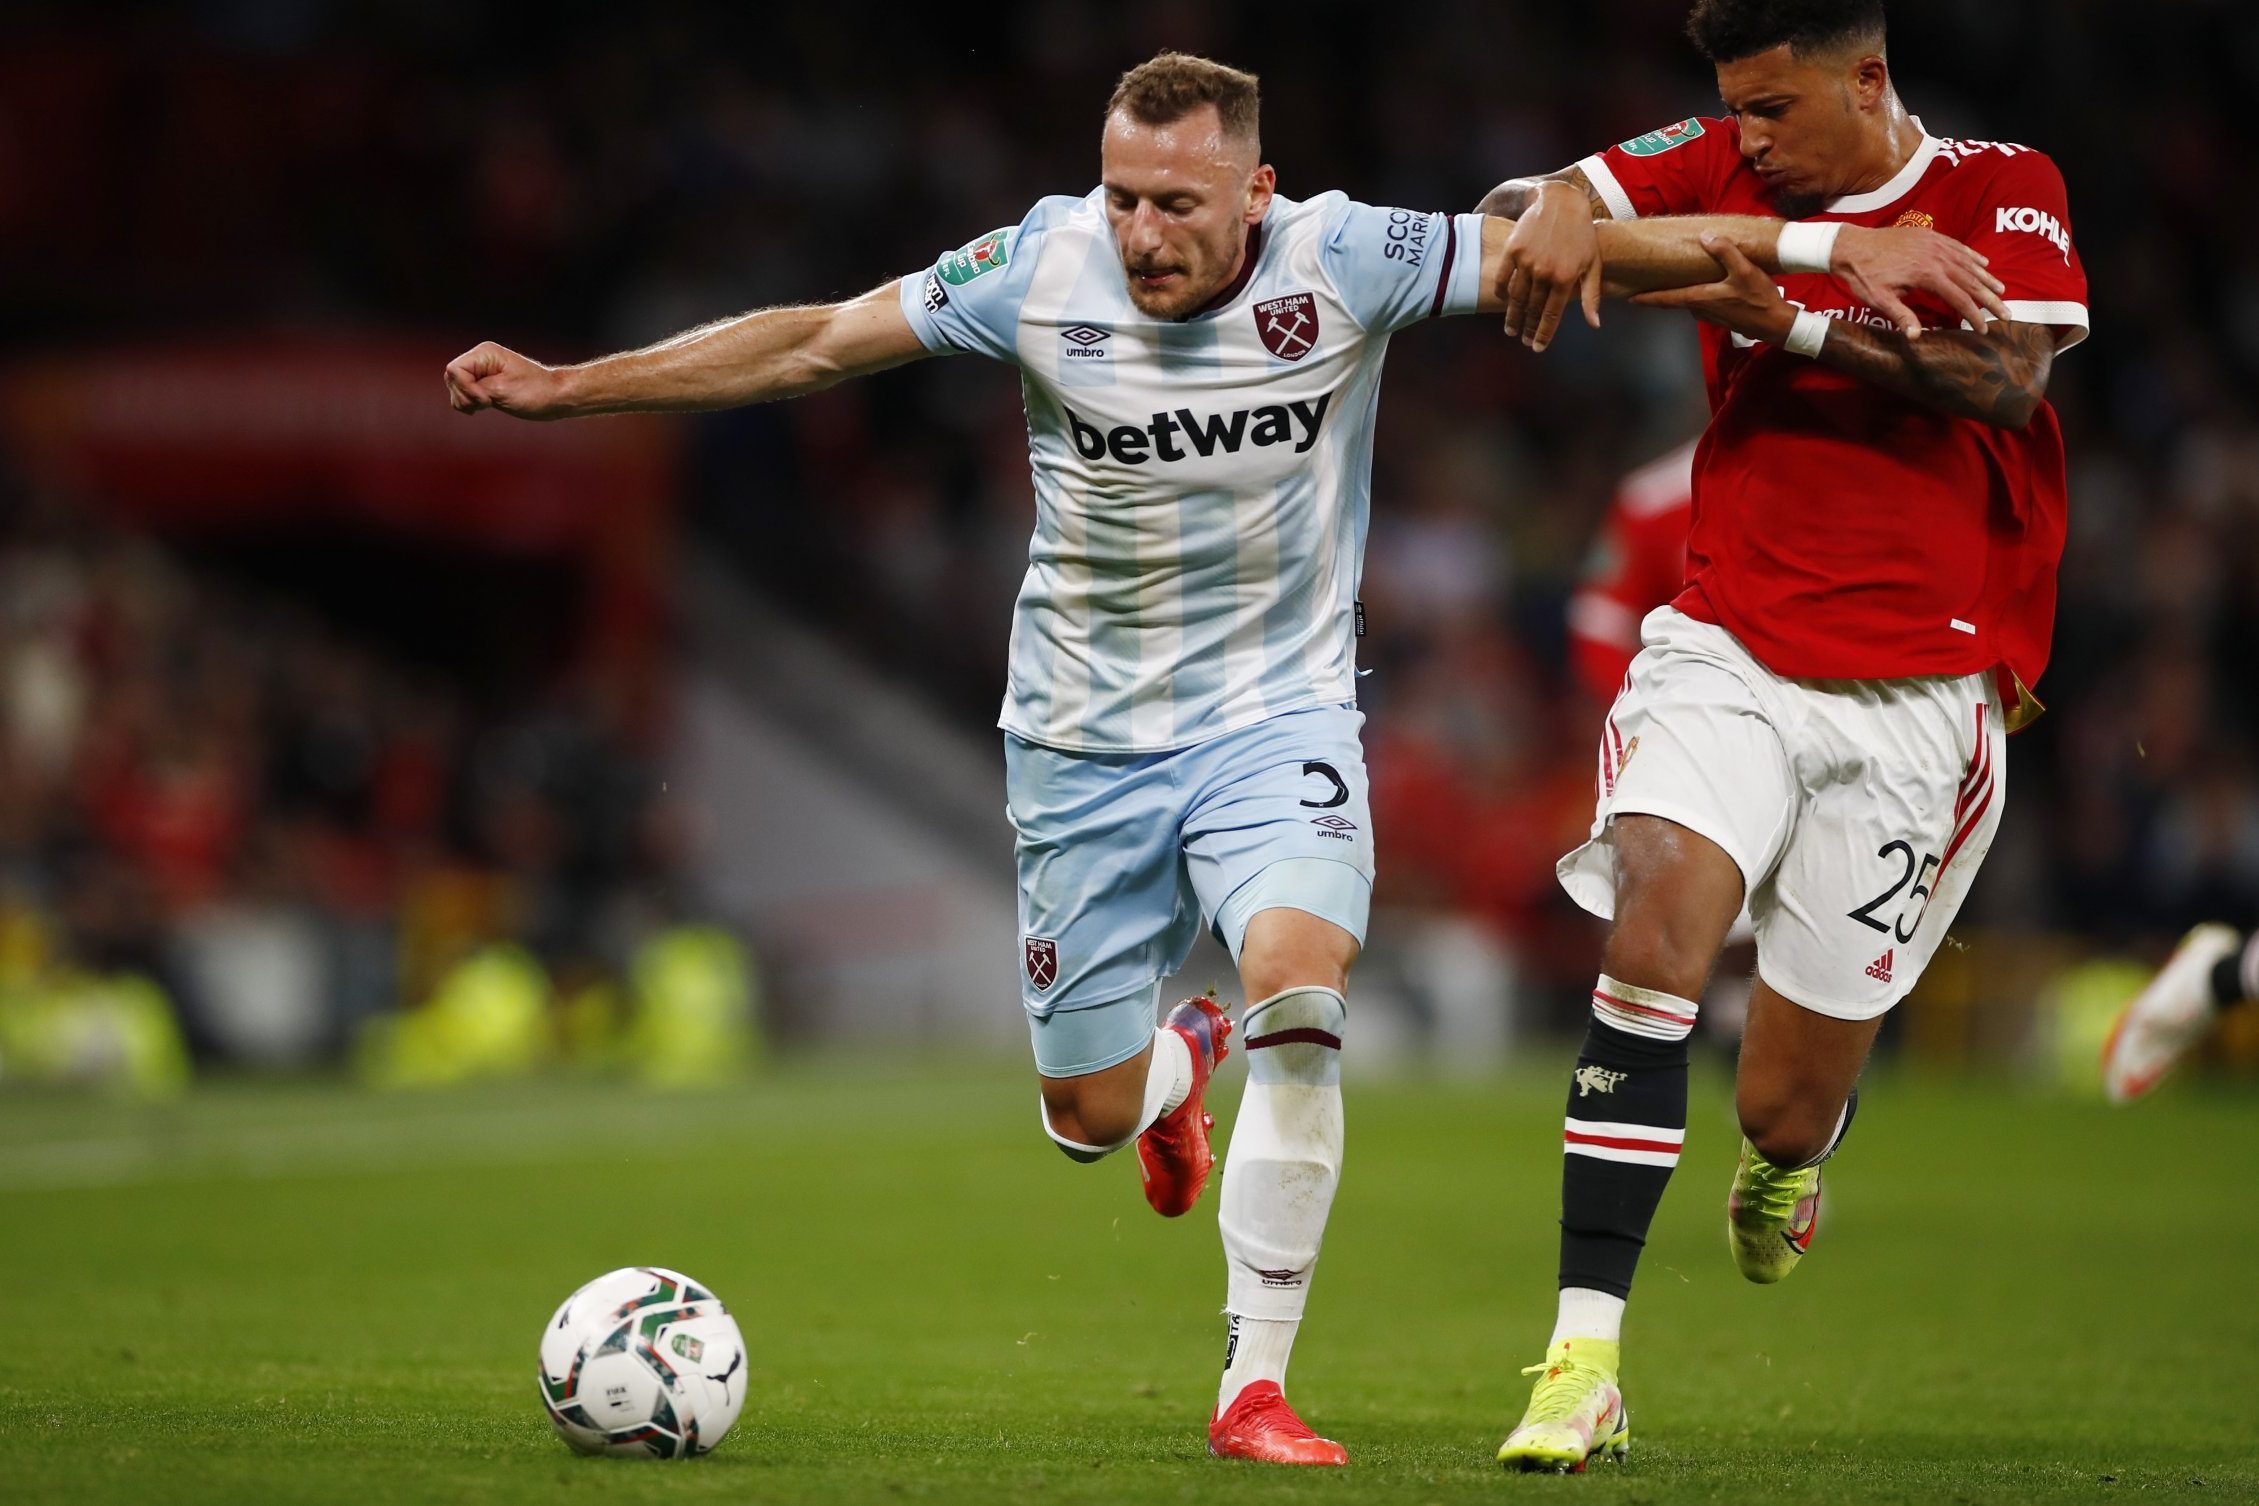 West Ham United defender Vladimir Coufal in action against Manchester United in the Carabao Cup